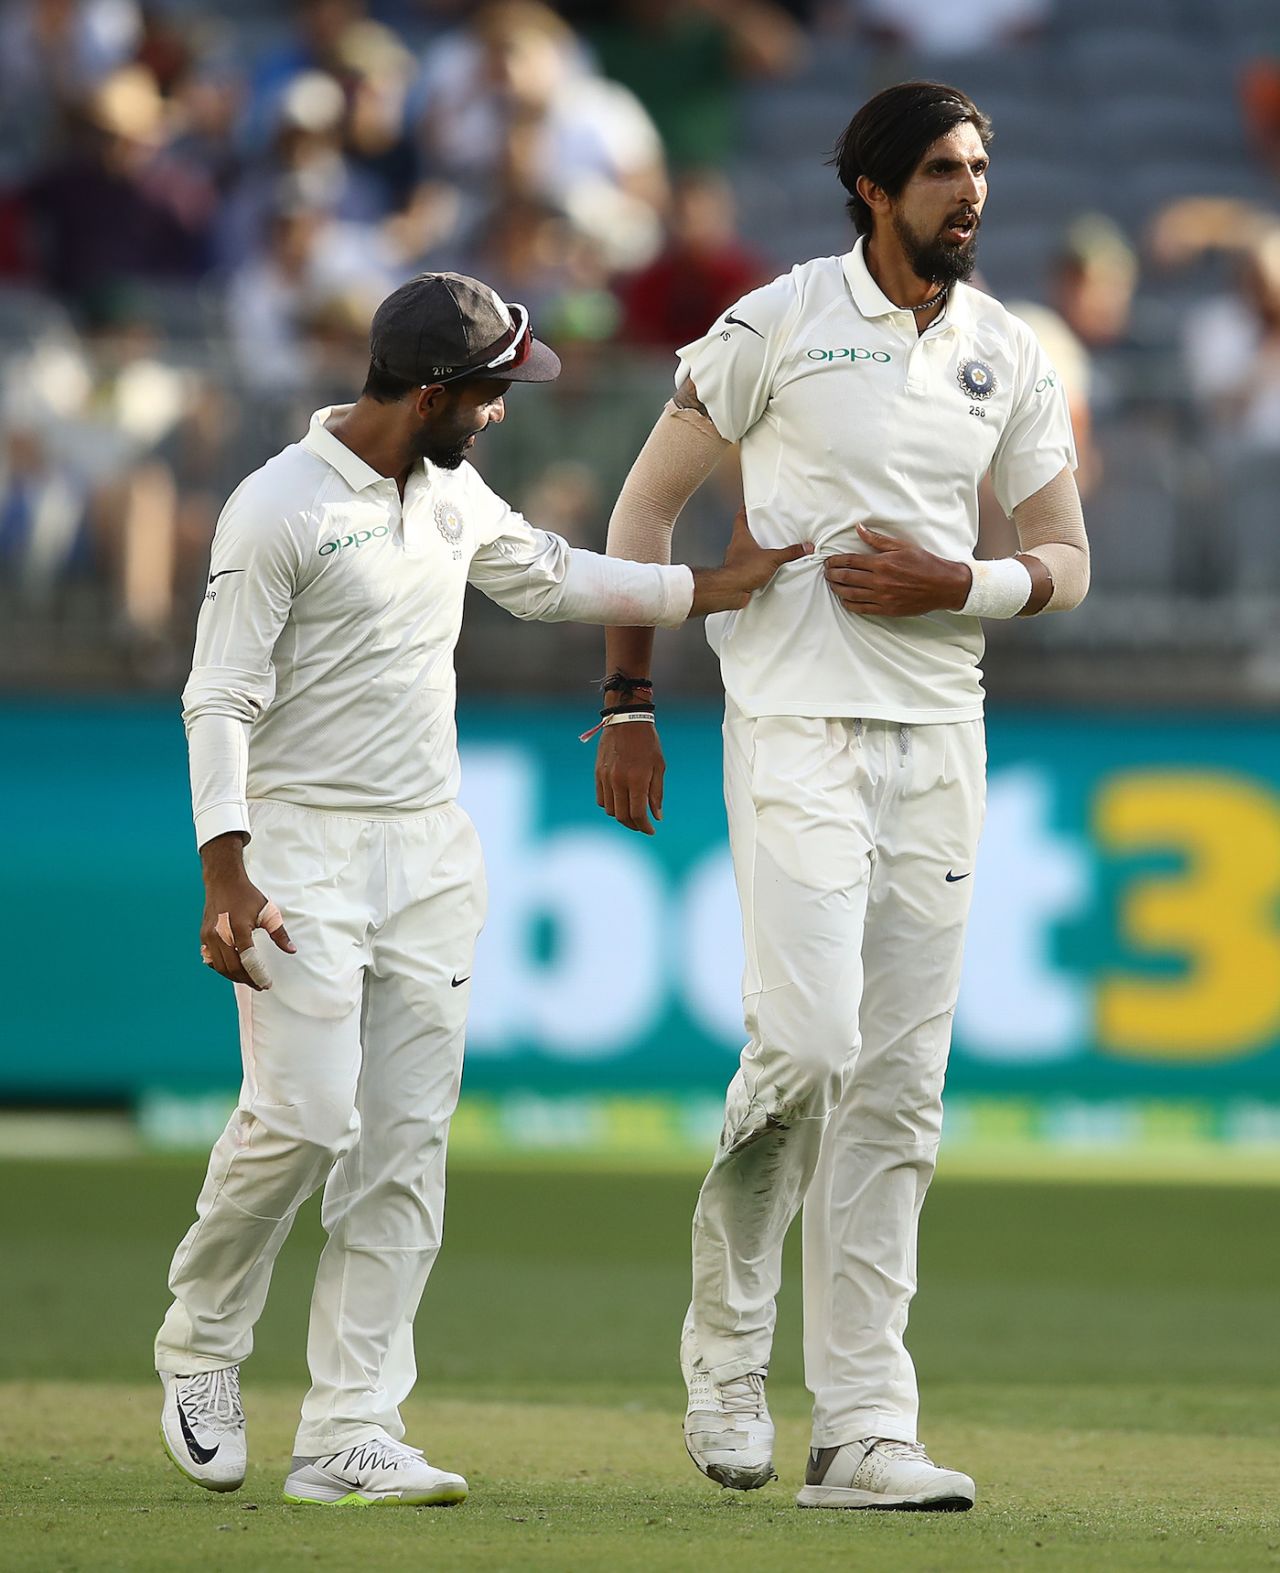 Ishant Sharma faced some discomfort towards the end of the day, Australia v India, 2nd Test, Perth, 1st day, December 14, 2018